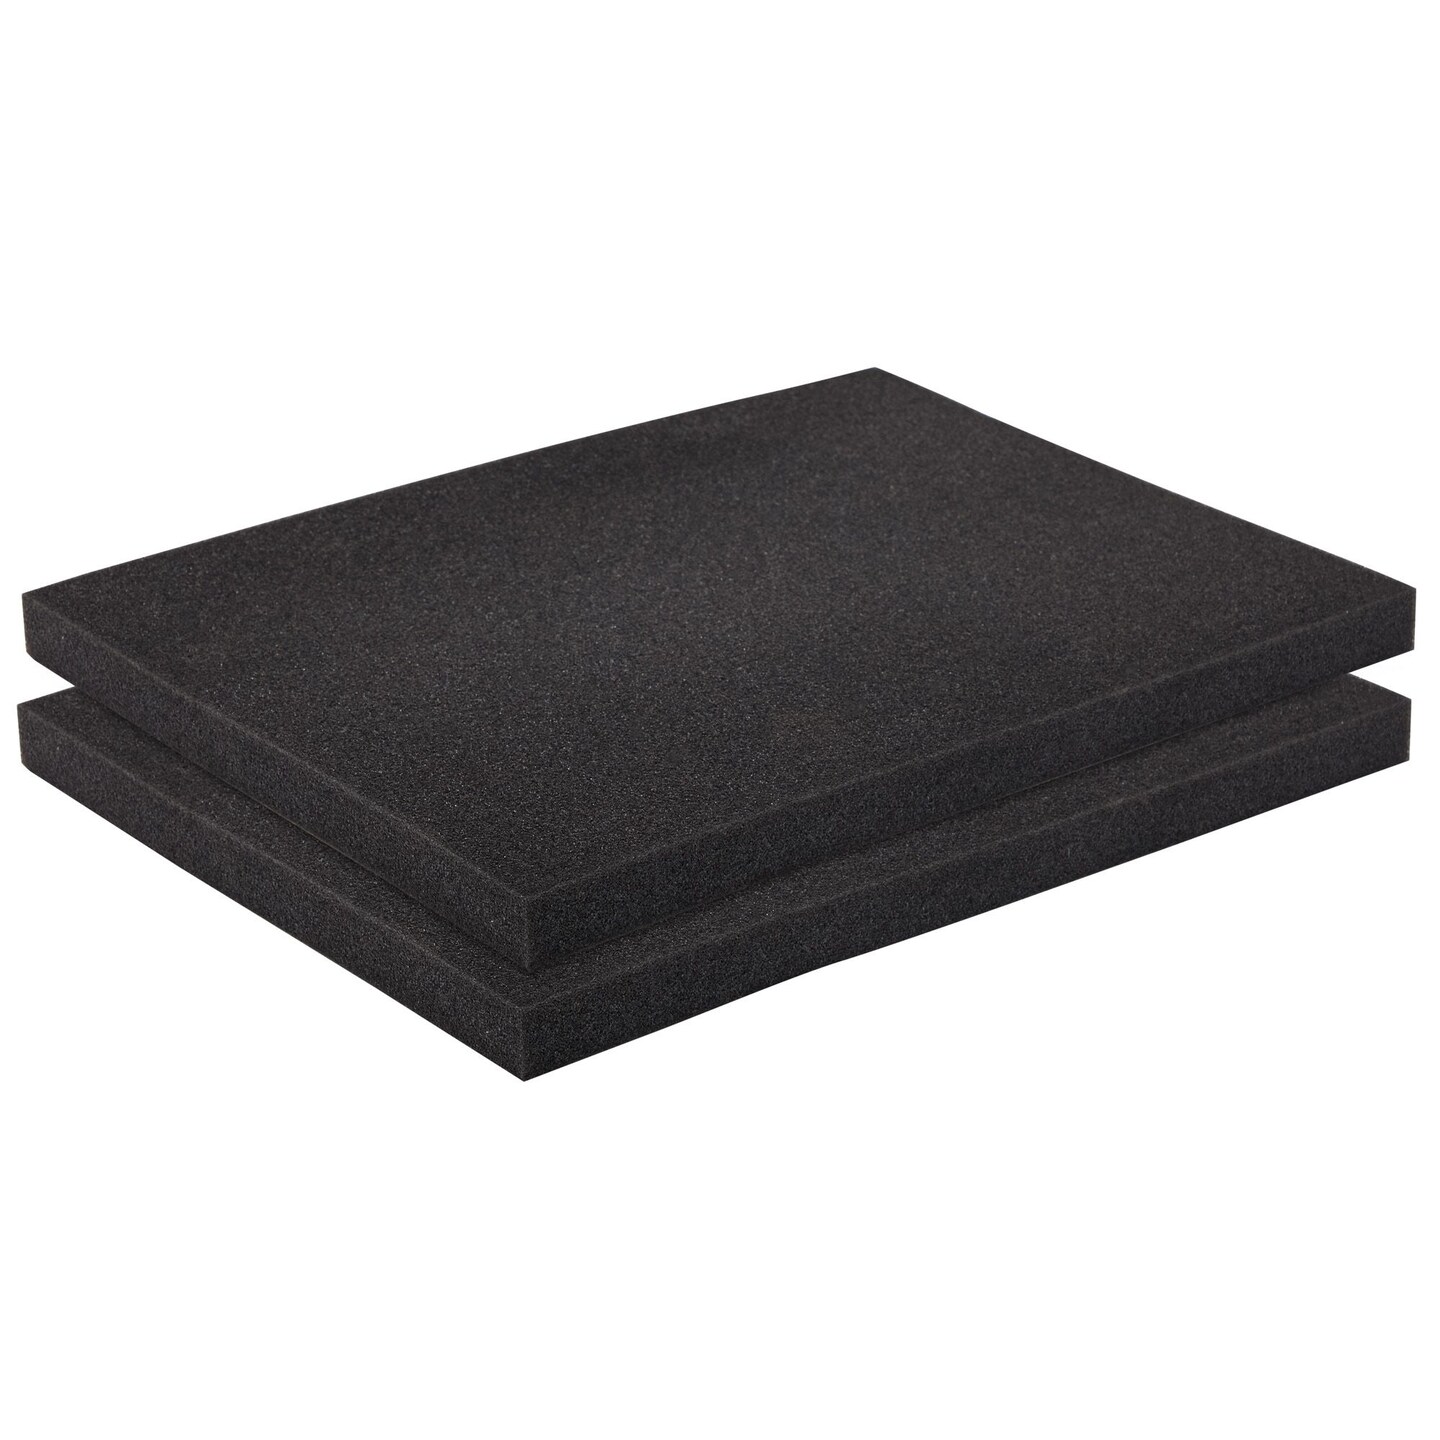 2-Pack Packing Foam Sheets, Polyurethane Moving Insert Pads (16x12x1.5)